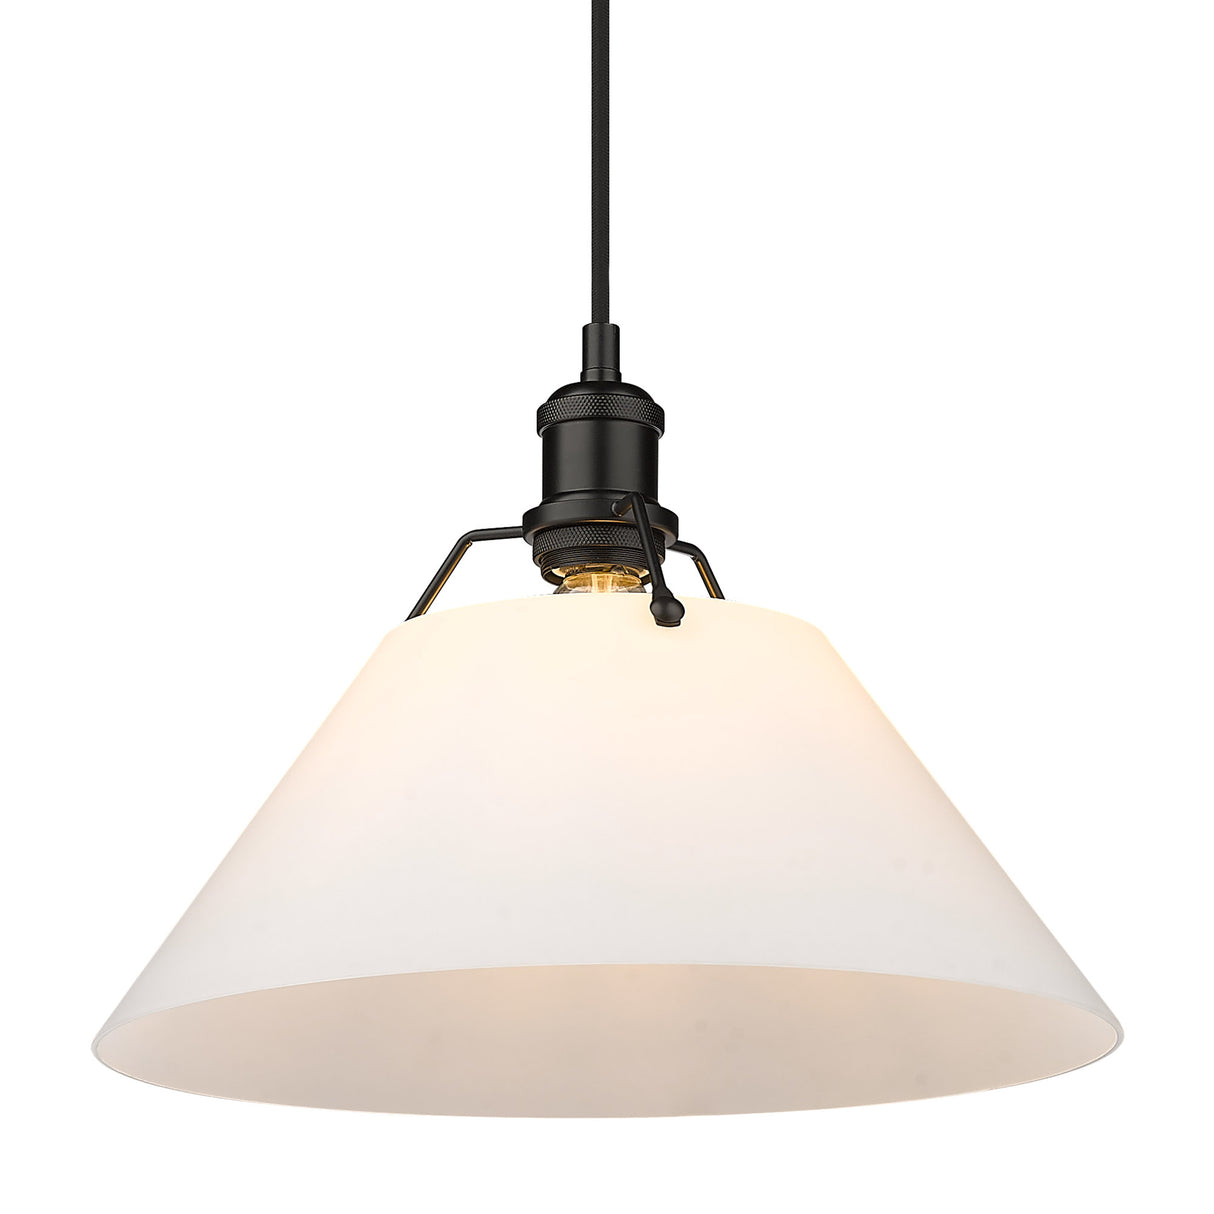 Orwell BLK Large Pendant in Matte Black with Opal Glass Shade